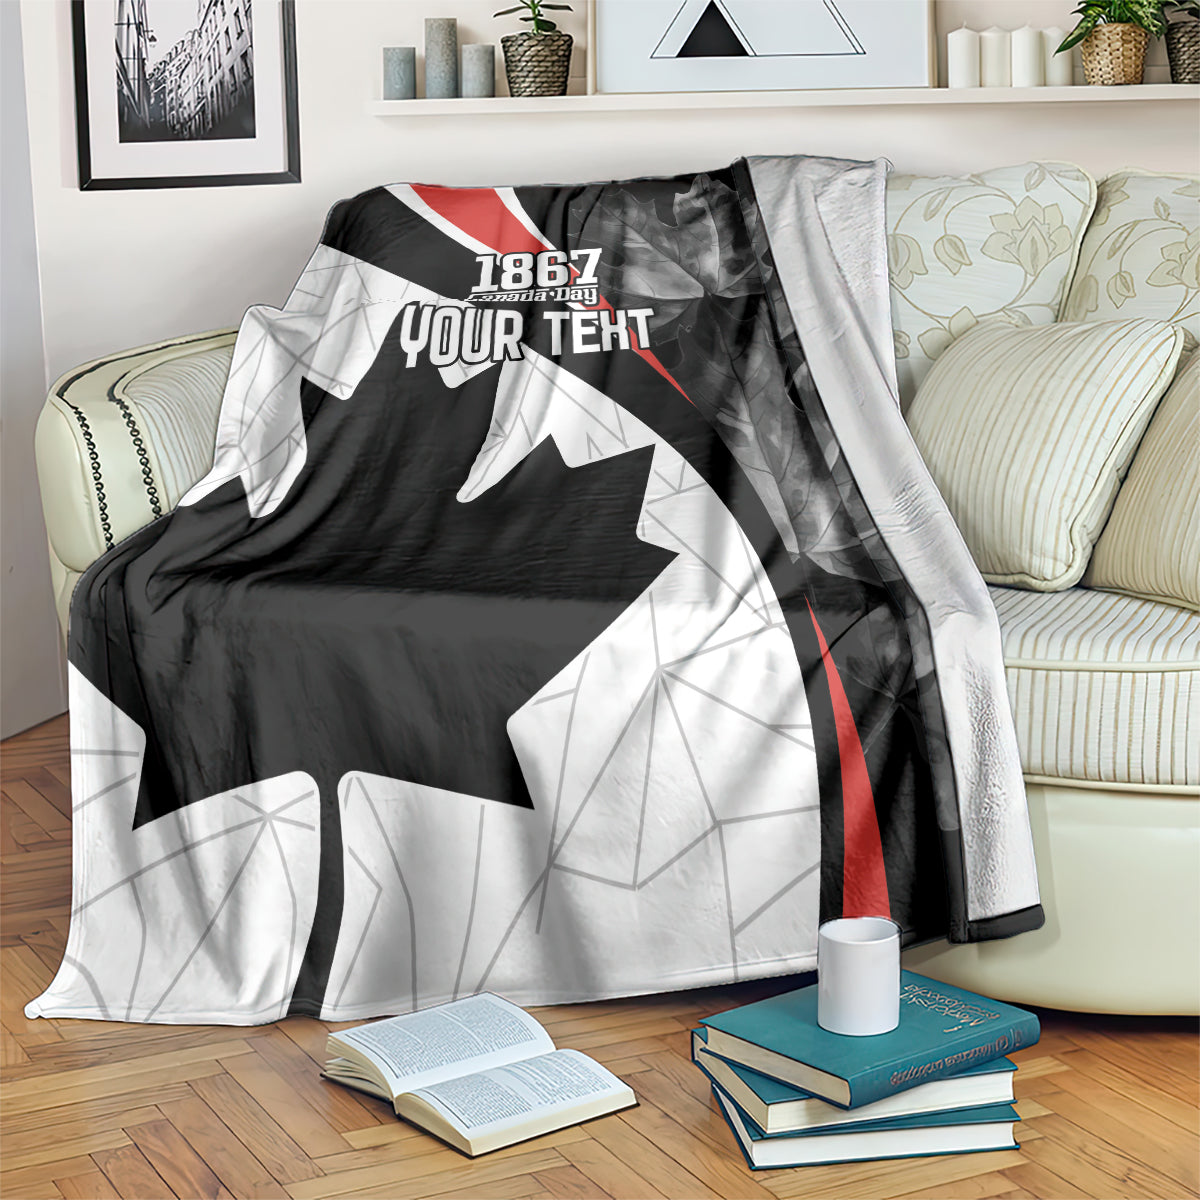 Personalized Canada Day Sine 1867 Blanket With National Maple Leaf